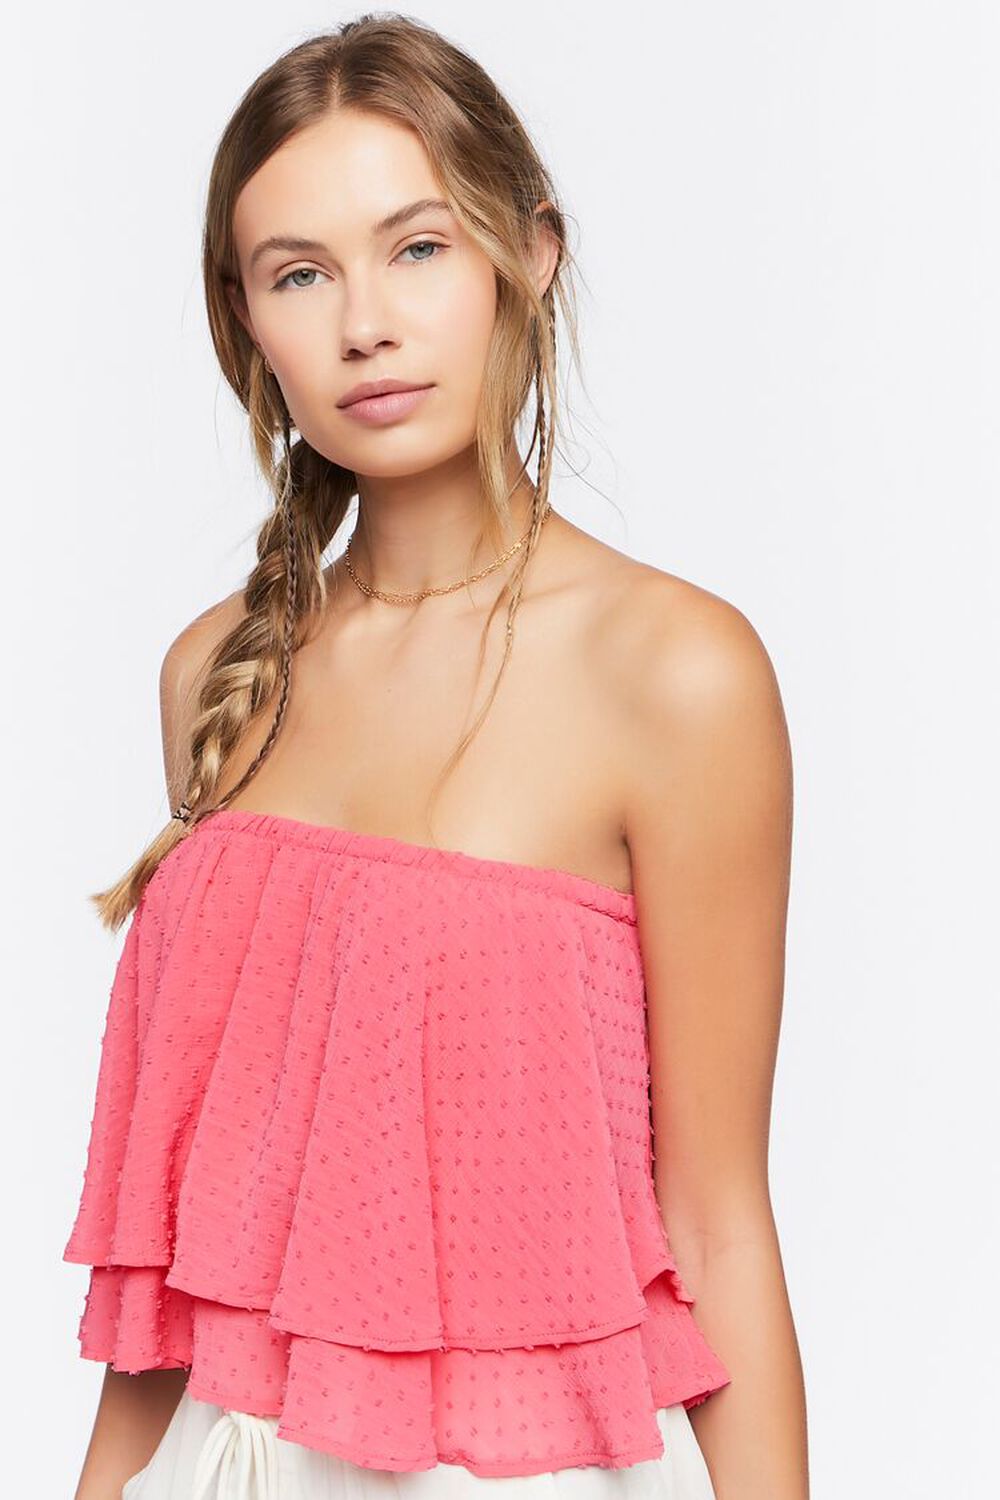 CORAL Strapless Clip Dot Crop Top, image 1